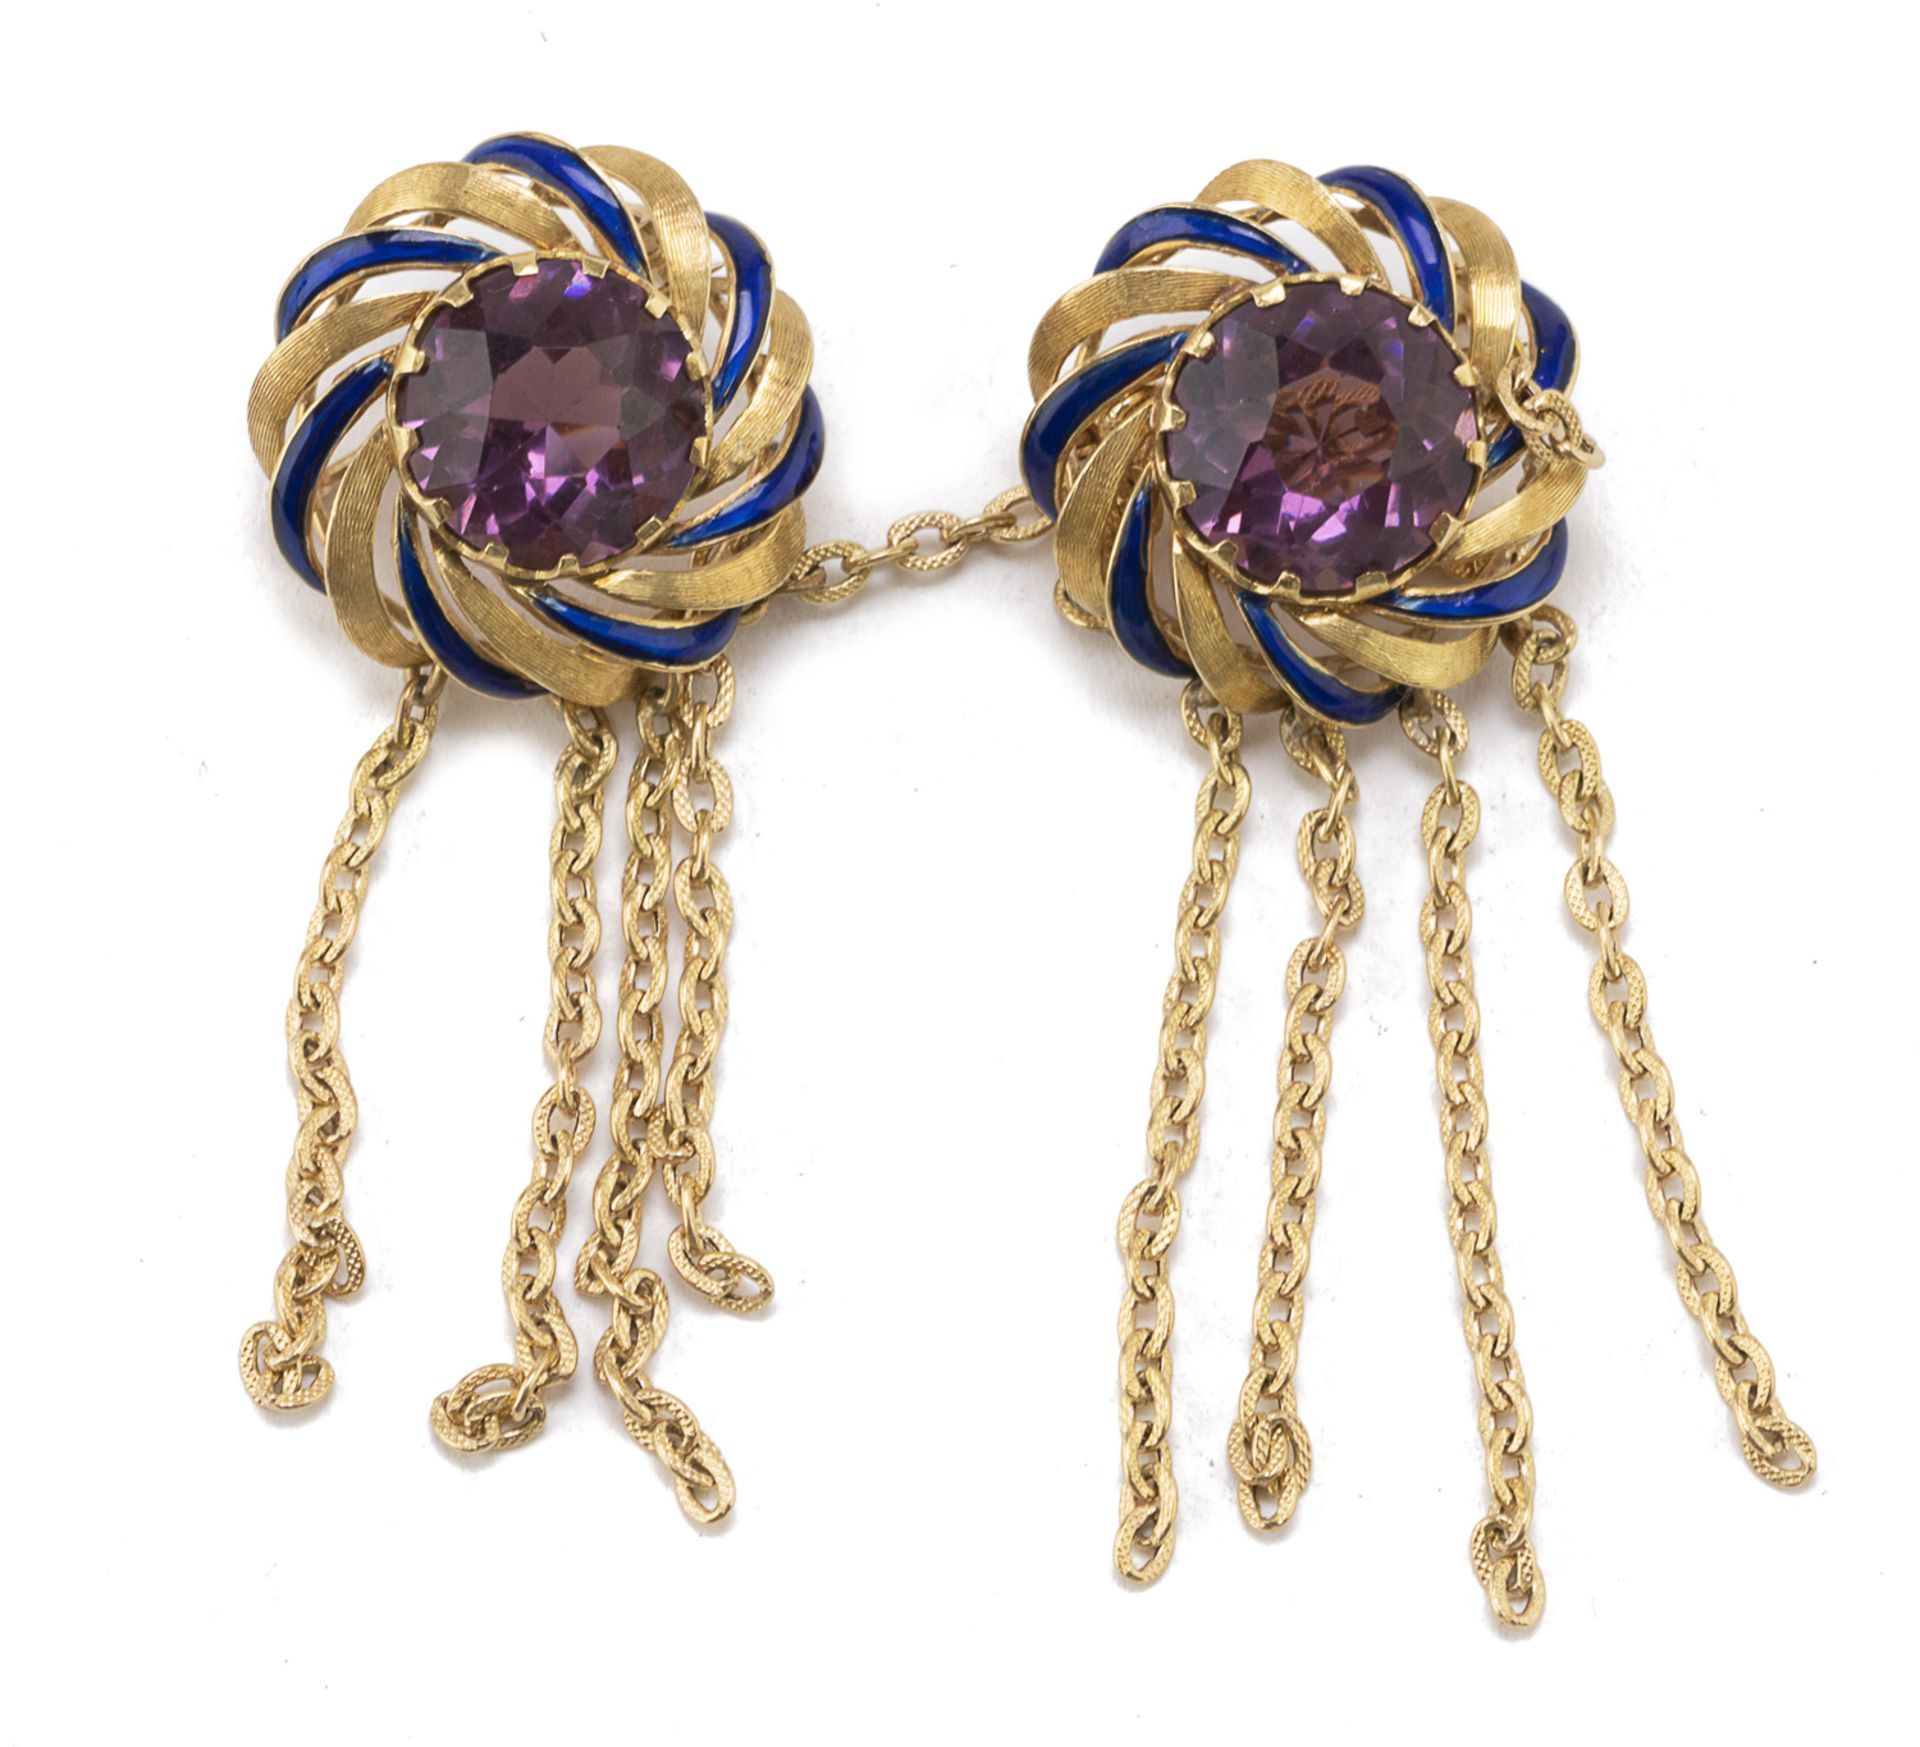 PAIR OF GOLD BROOCHES